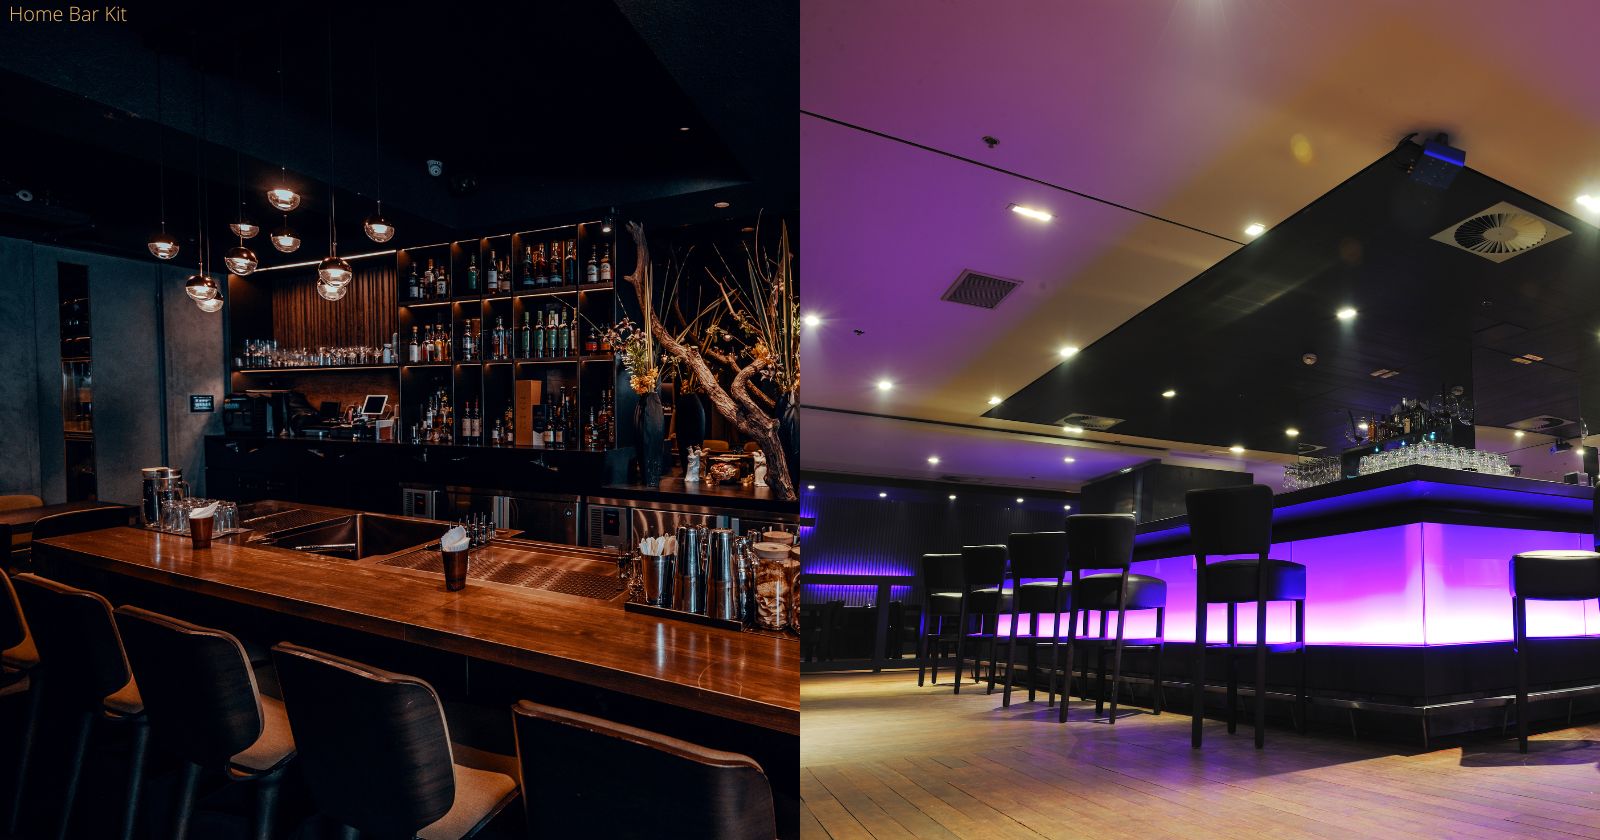 Which Home Bar Is The Best